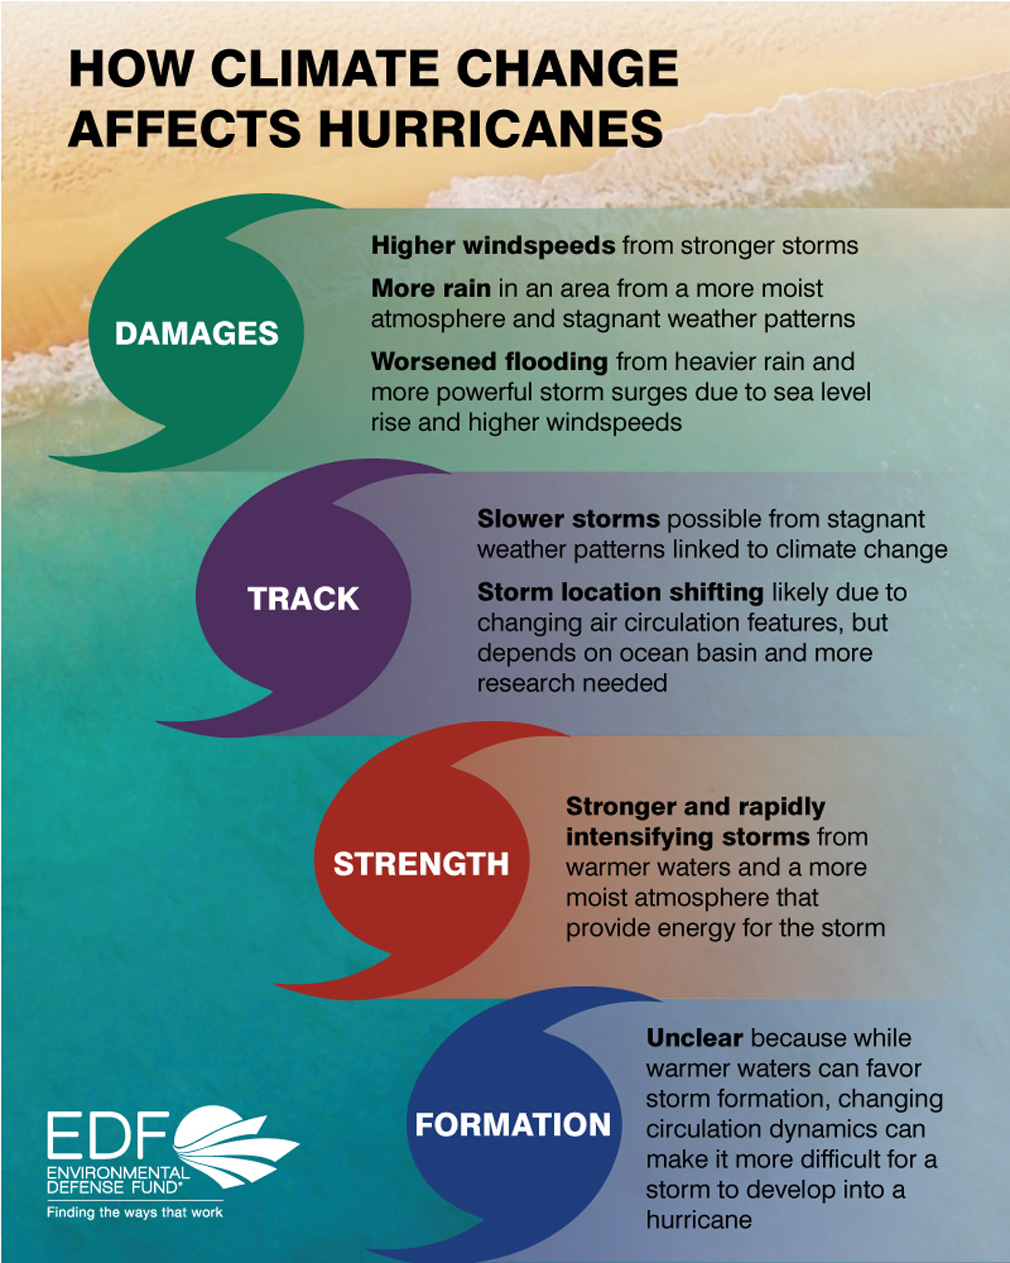 how climate change affects hurricanes - damages, track, strength, and formation